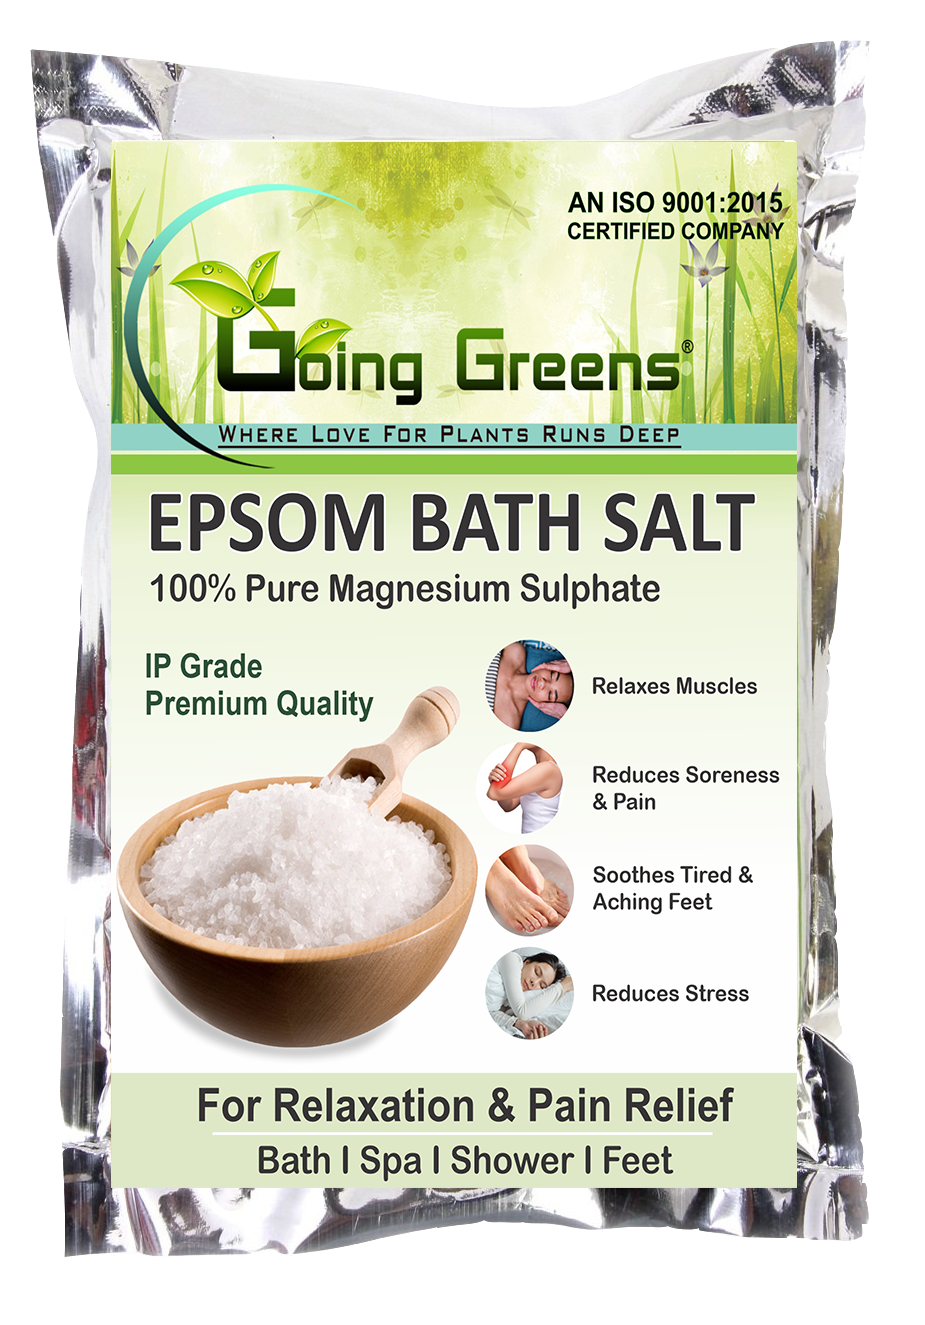 Epsom Salt (Magnesium Sulphate) for Muscle Relaxation & Relief, Relives Aches & Pain